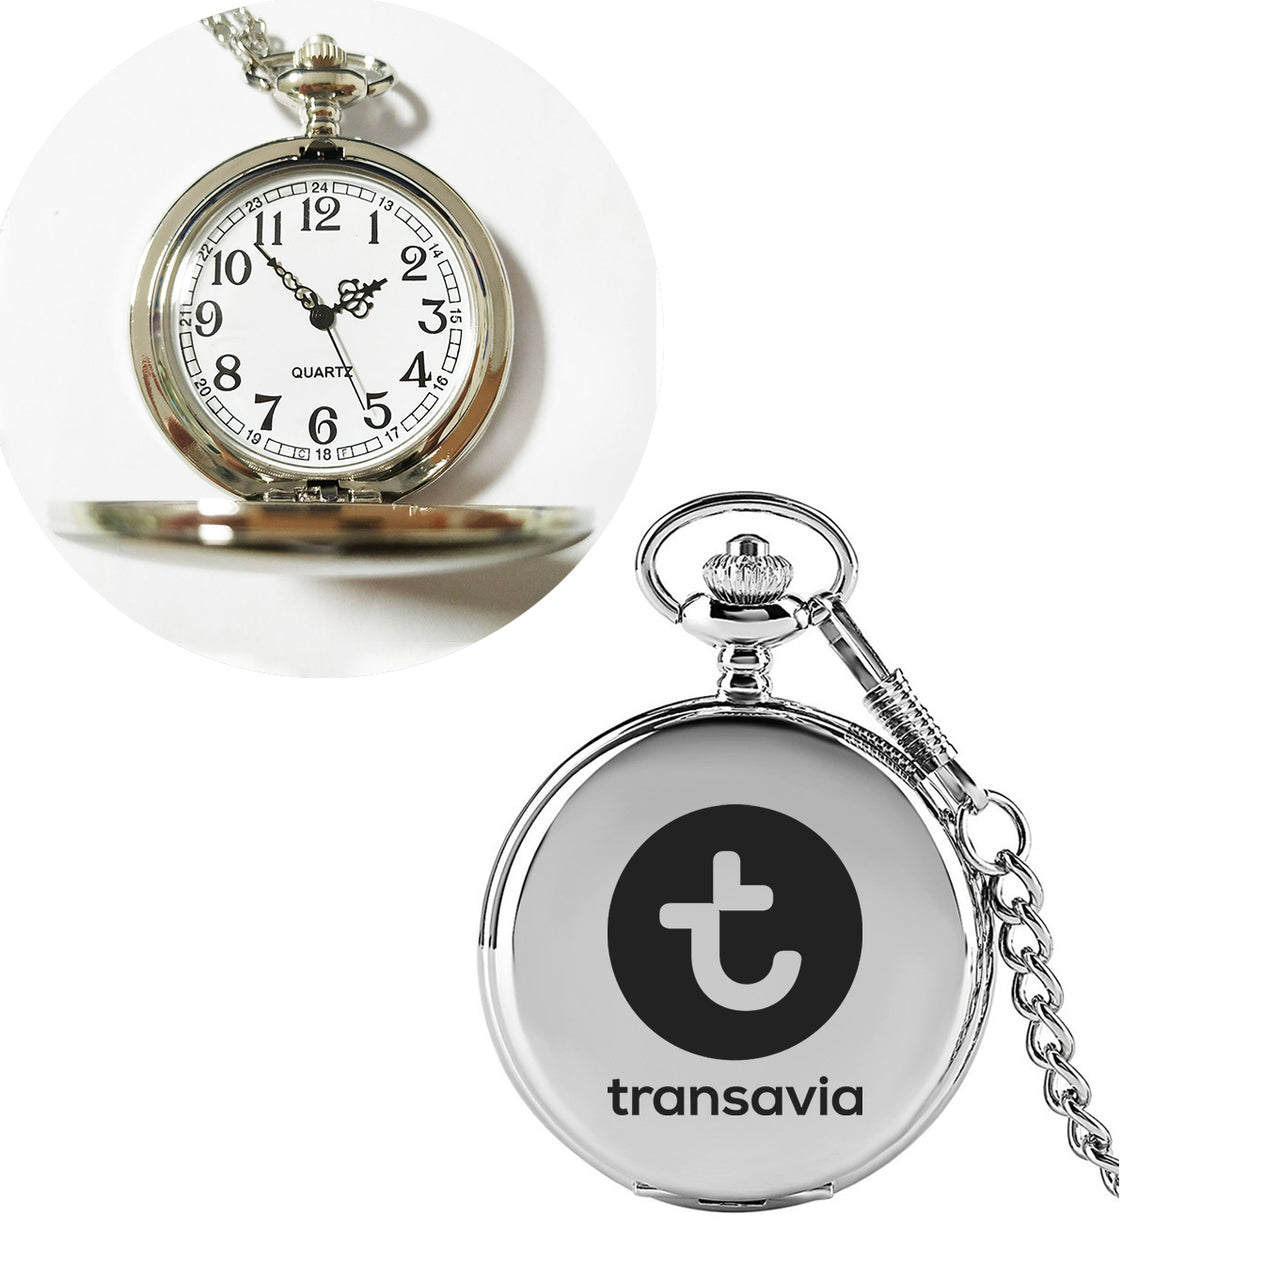 Transavia France Airlines Designed Pocket Watches